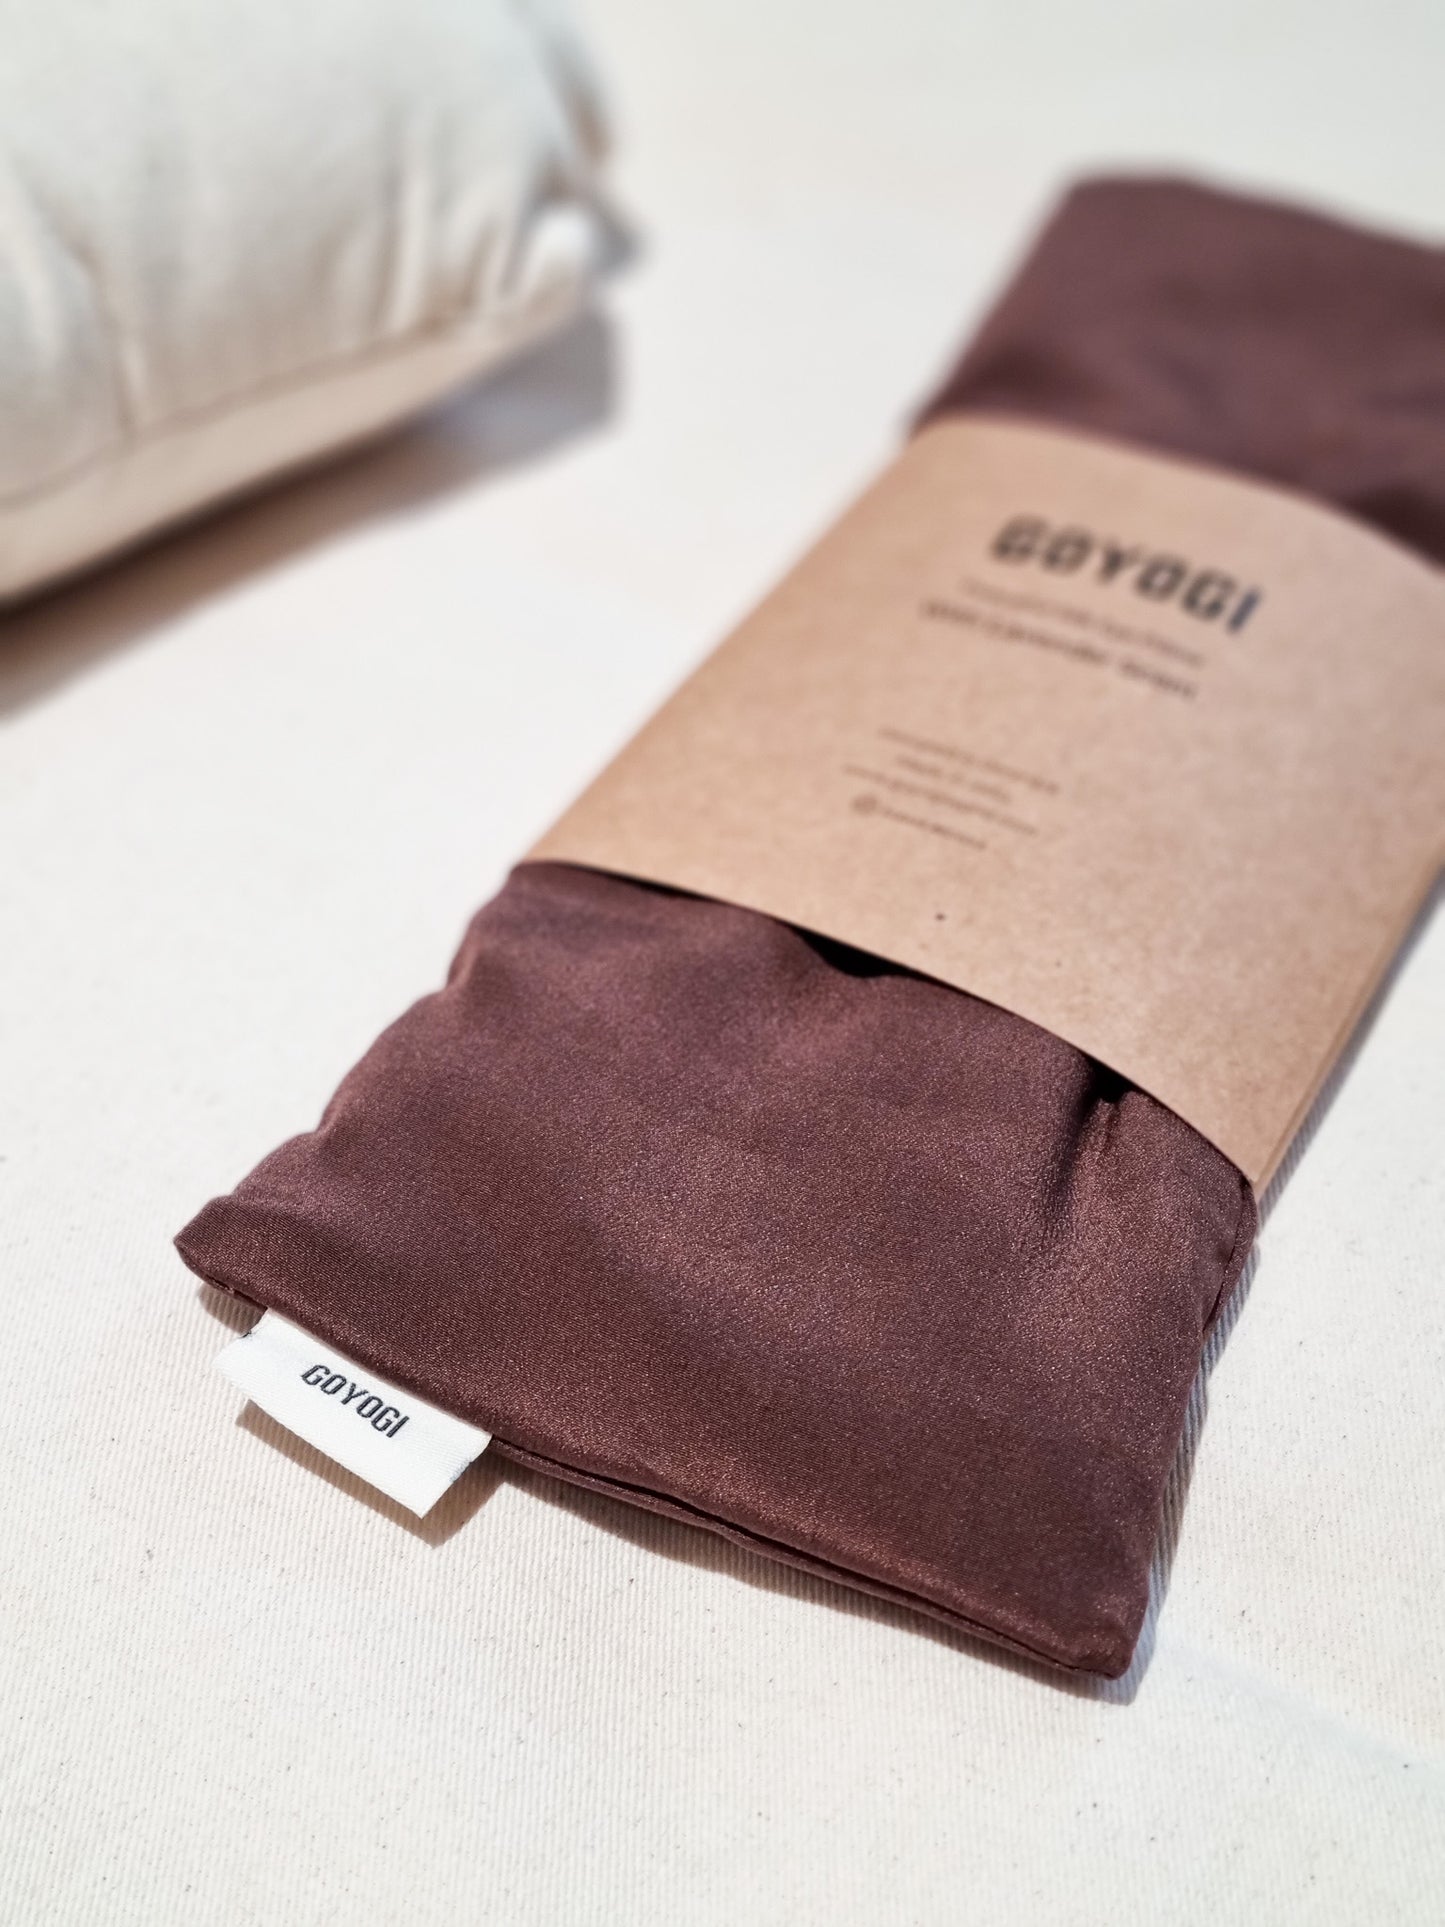 Peaceful Silk Eye Pillow with lavender - Brown